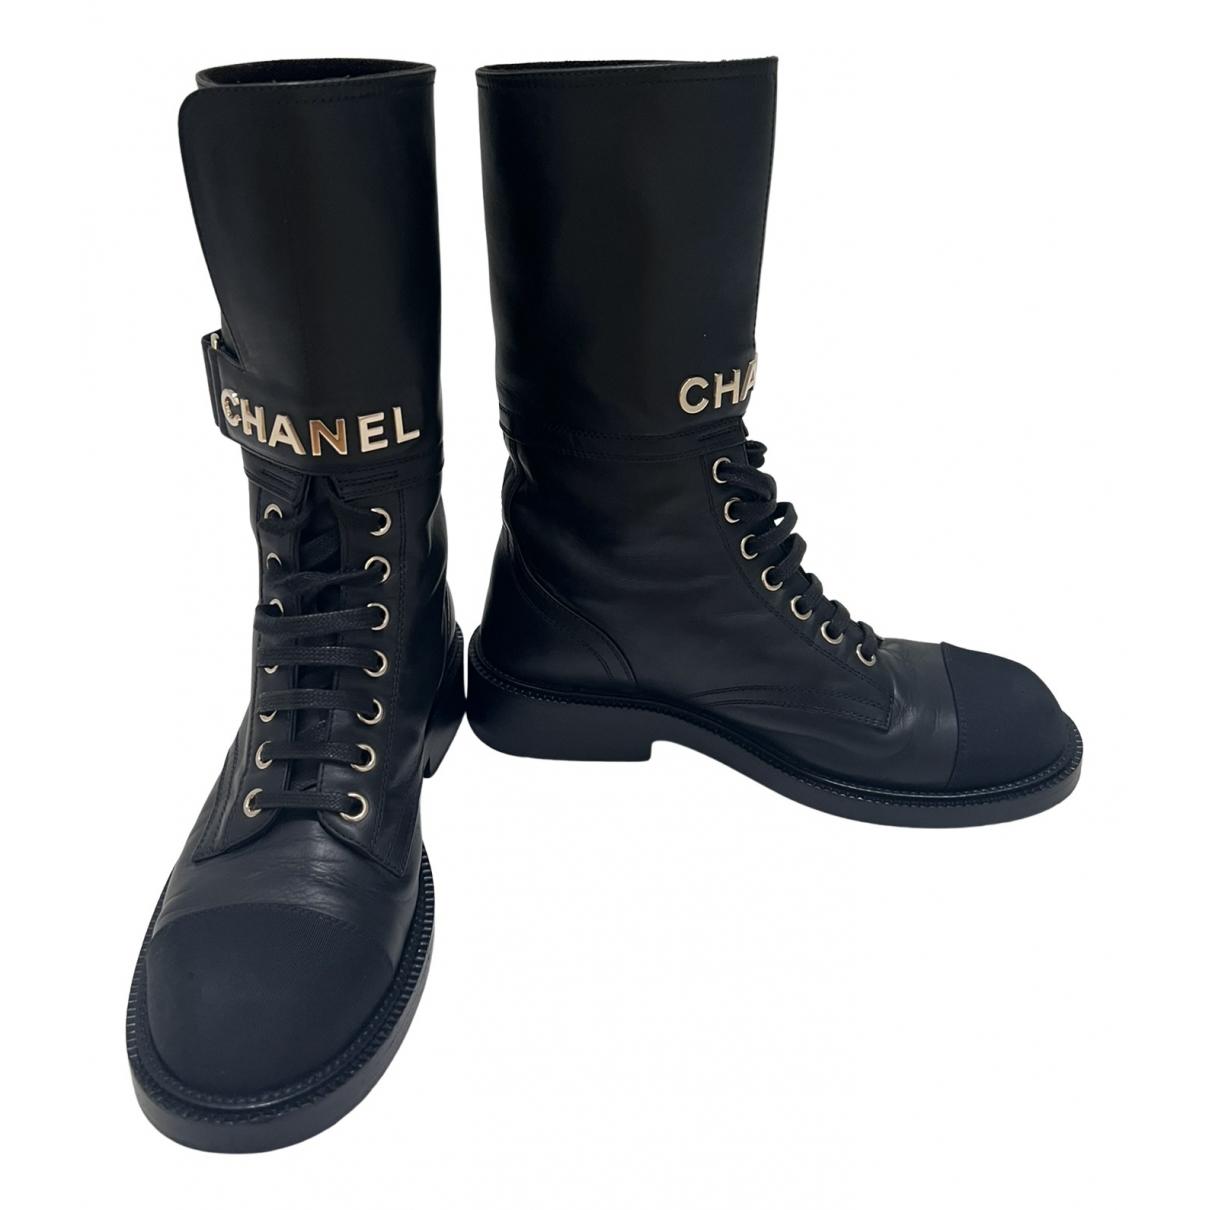 Leather biker boots Chanel Black size 36.5 EU in Leather - 23817113